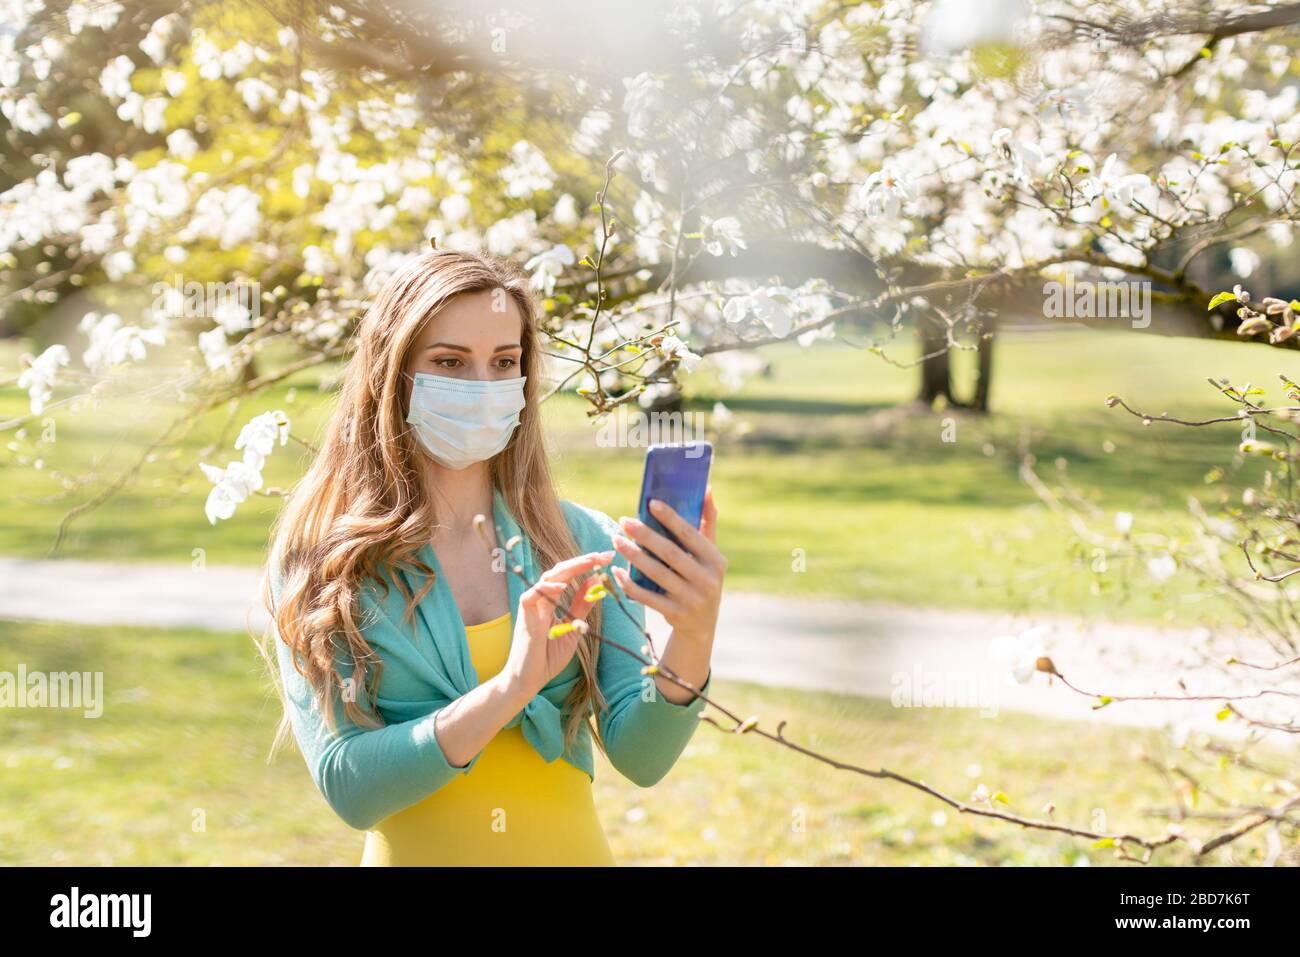 Woman taking a selfie with her phone in spring during Covid-19 crisis wearing a mask Stock Photo